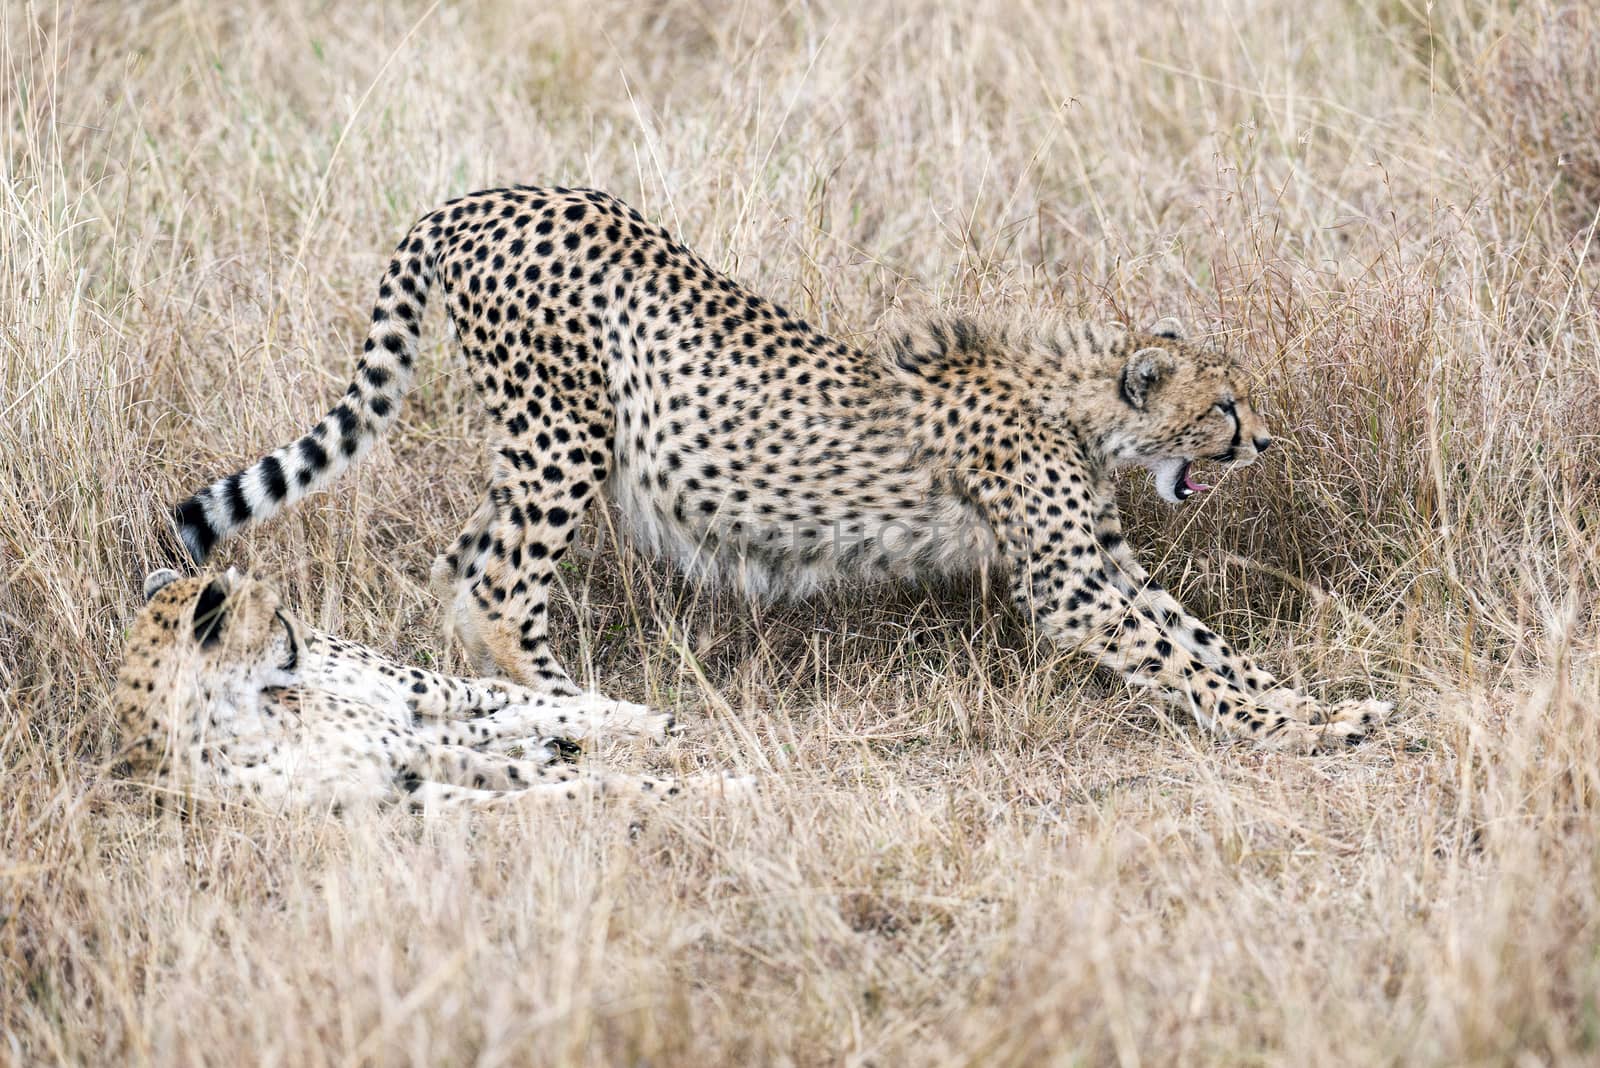 Cheetah takes a moment to relax with a yawn after successful hunting while his brother lay around in long grass,  Masai Mara National Reserve, Kenya, East Africa